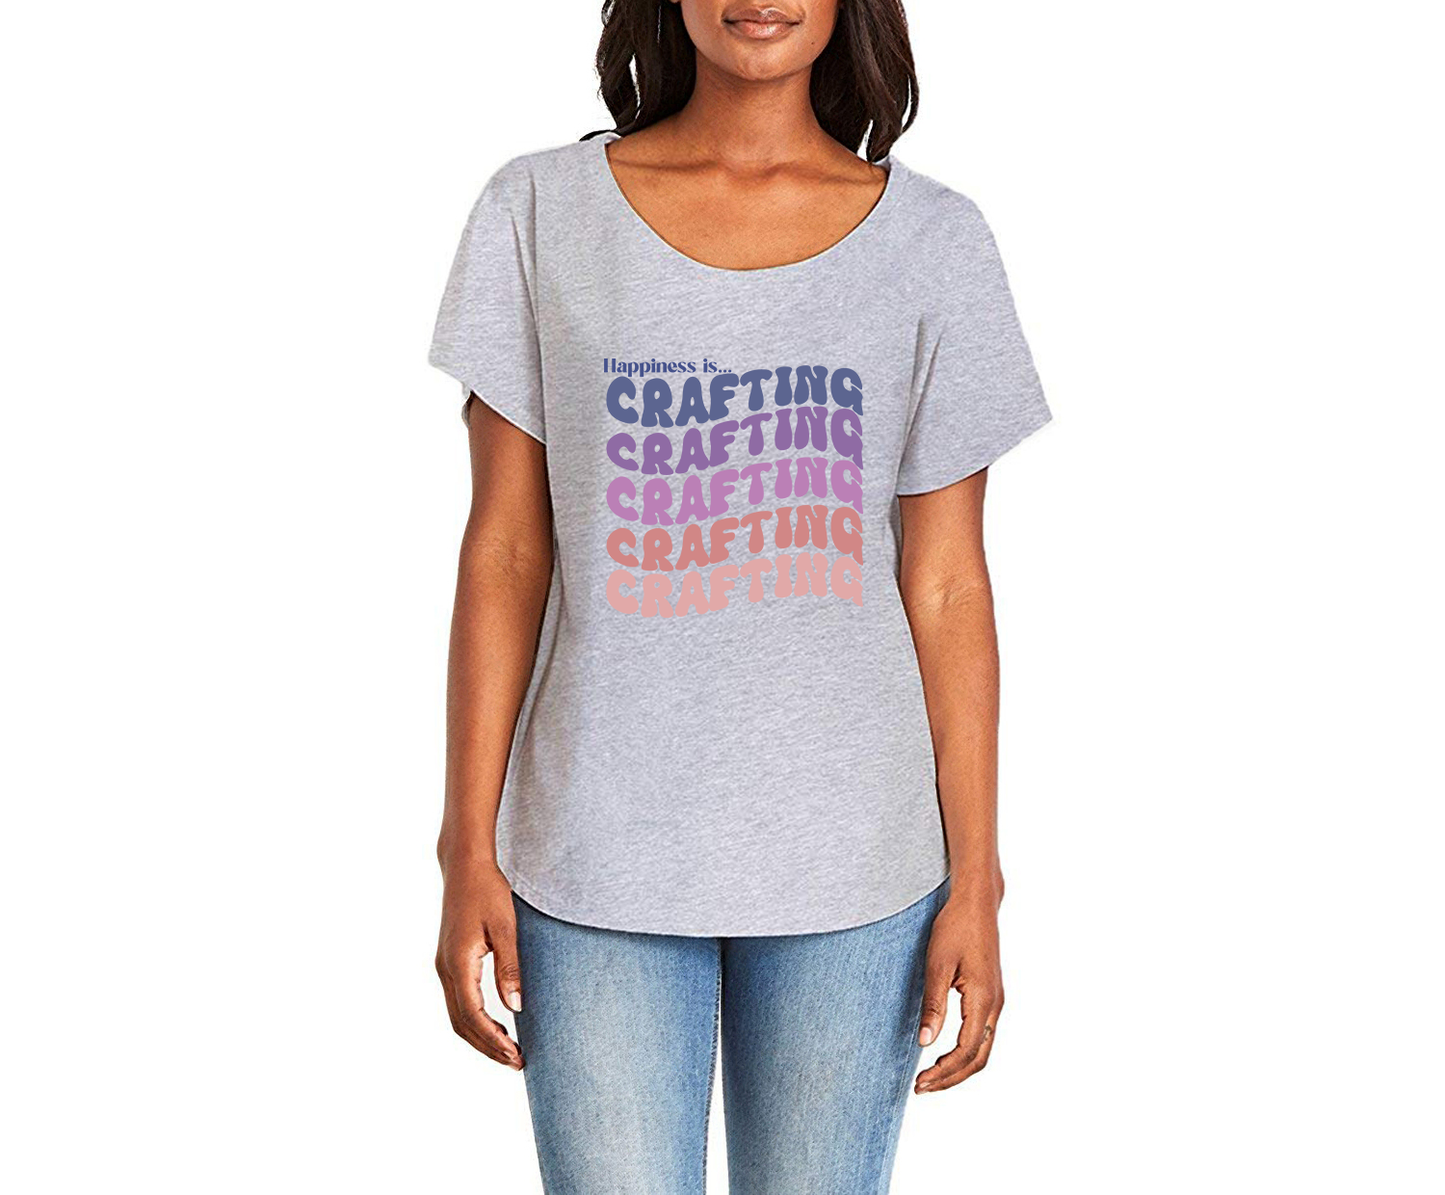 Happiness is Crafting Ladies Tee Shirt - In White & Grey